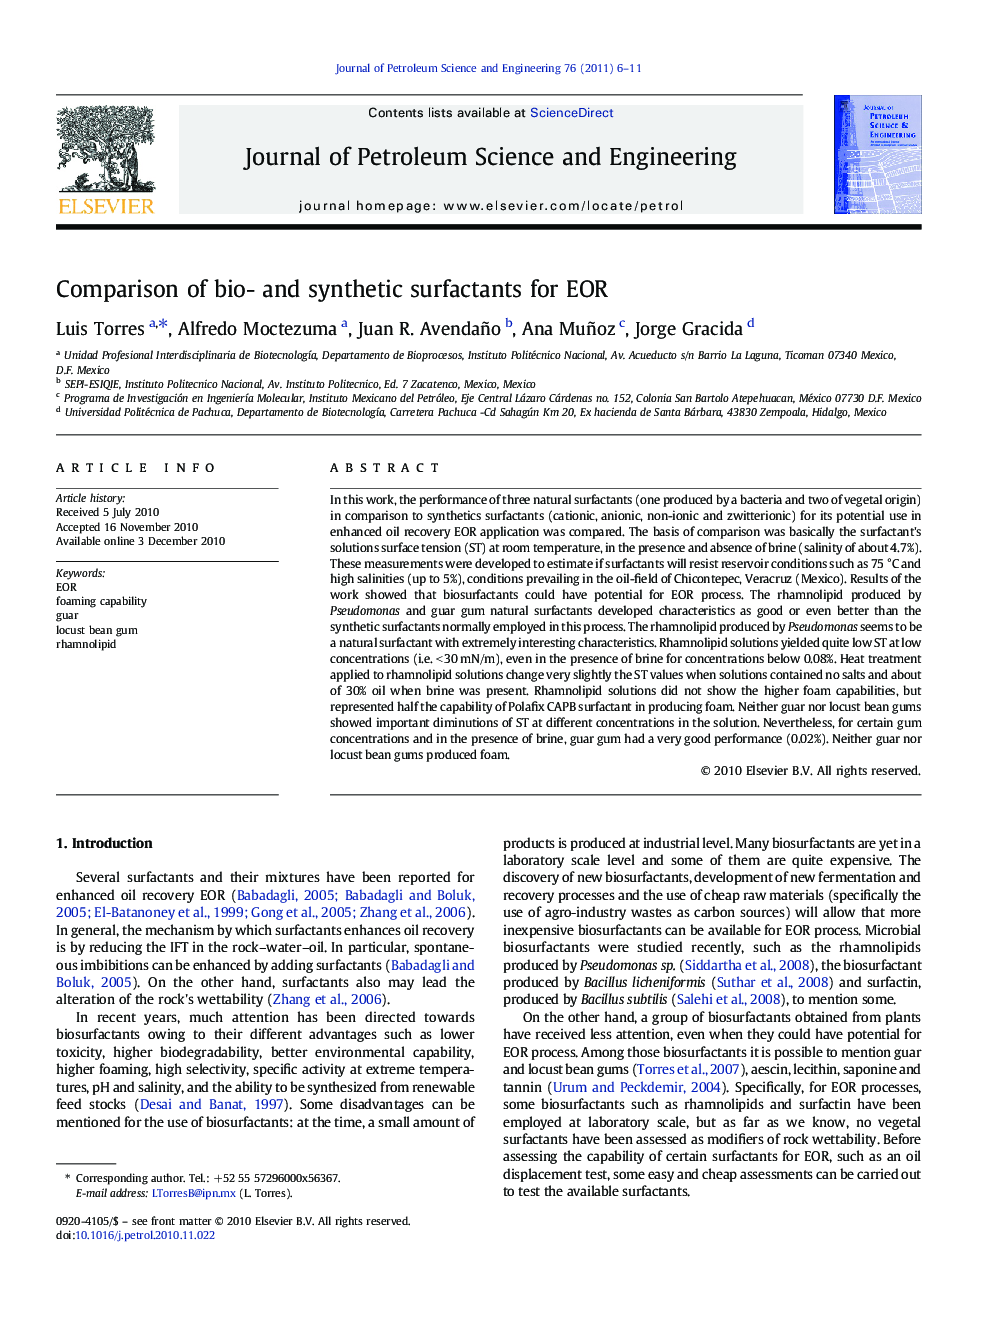 Comparison of bio- and synthetic surfactants for EOR